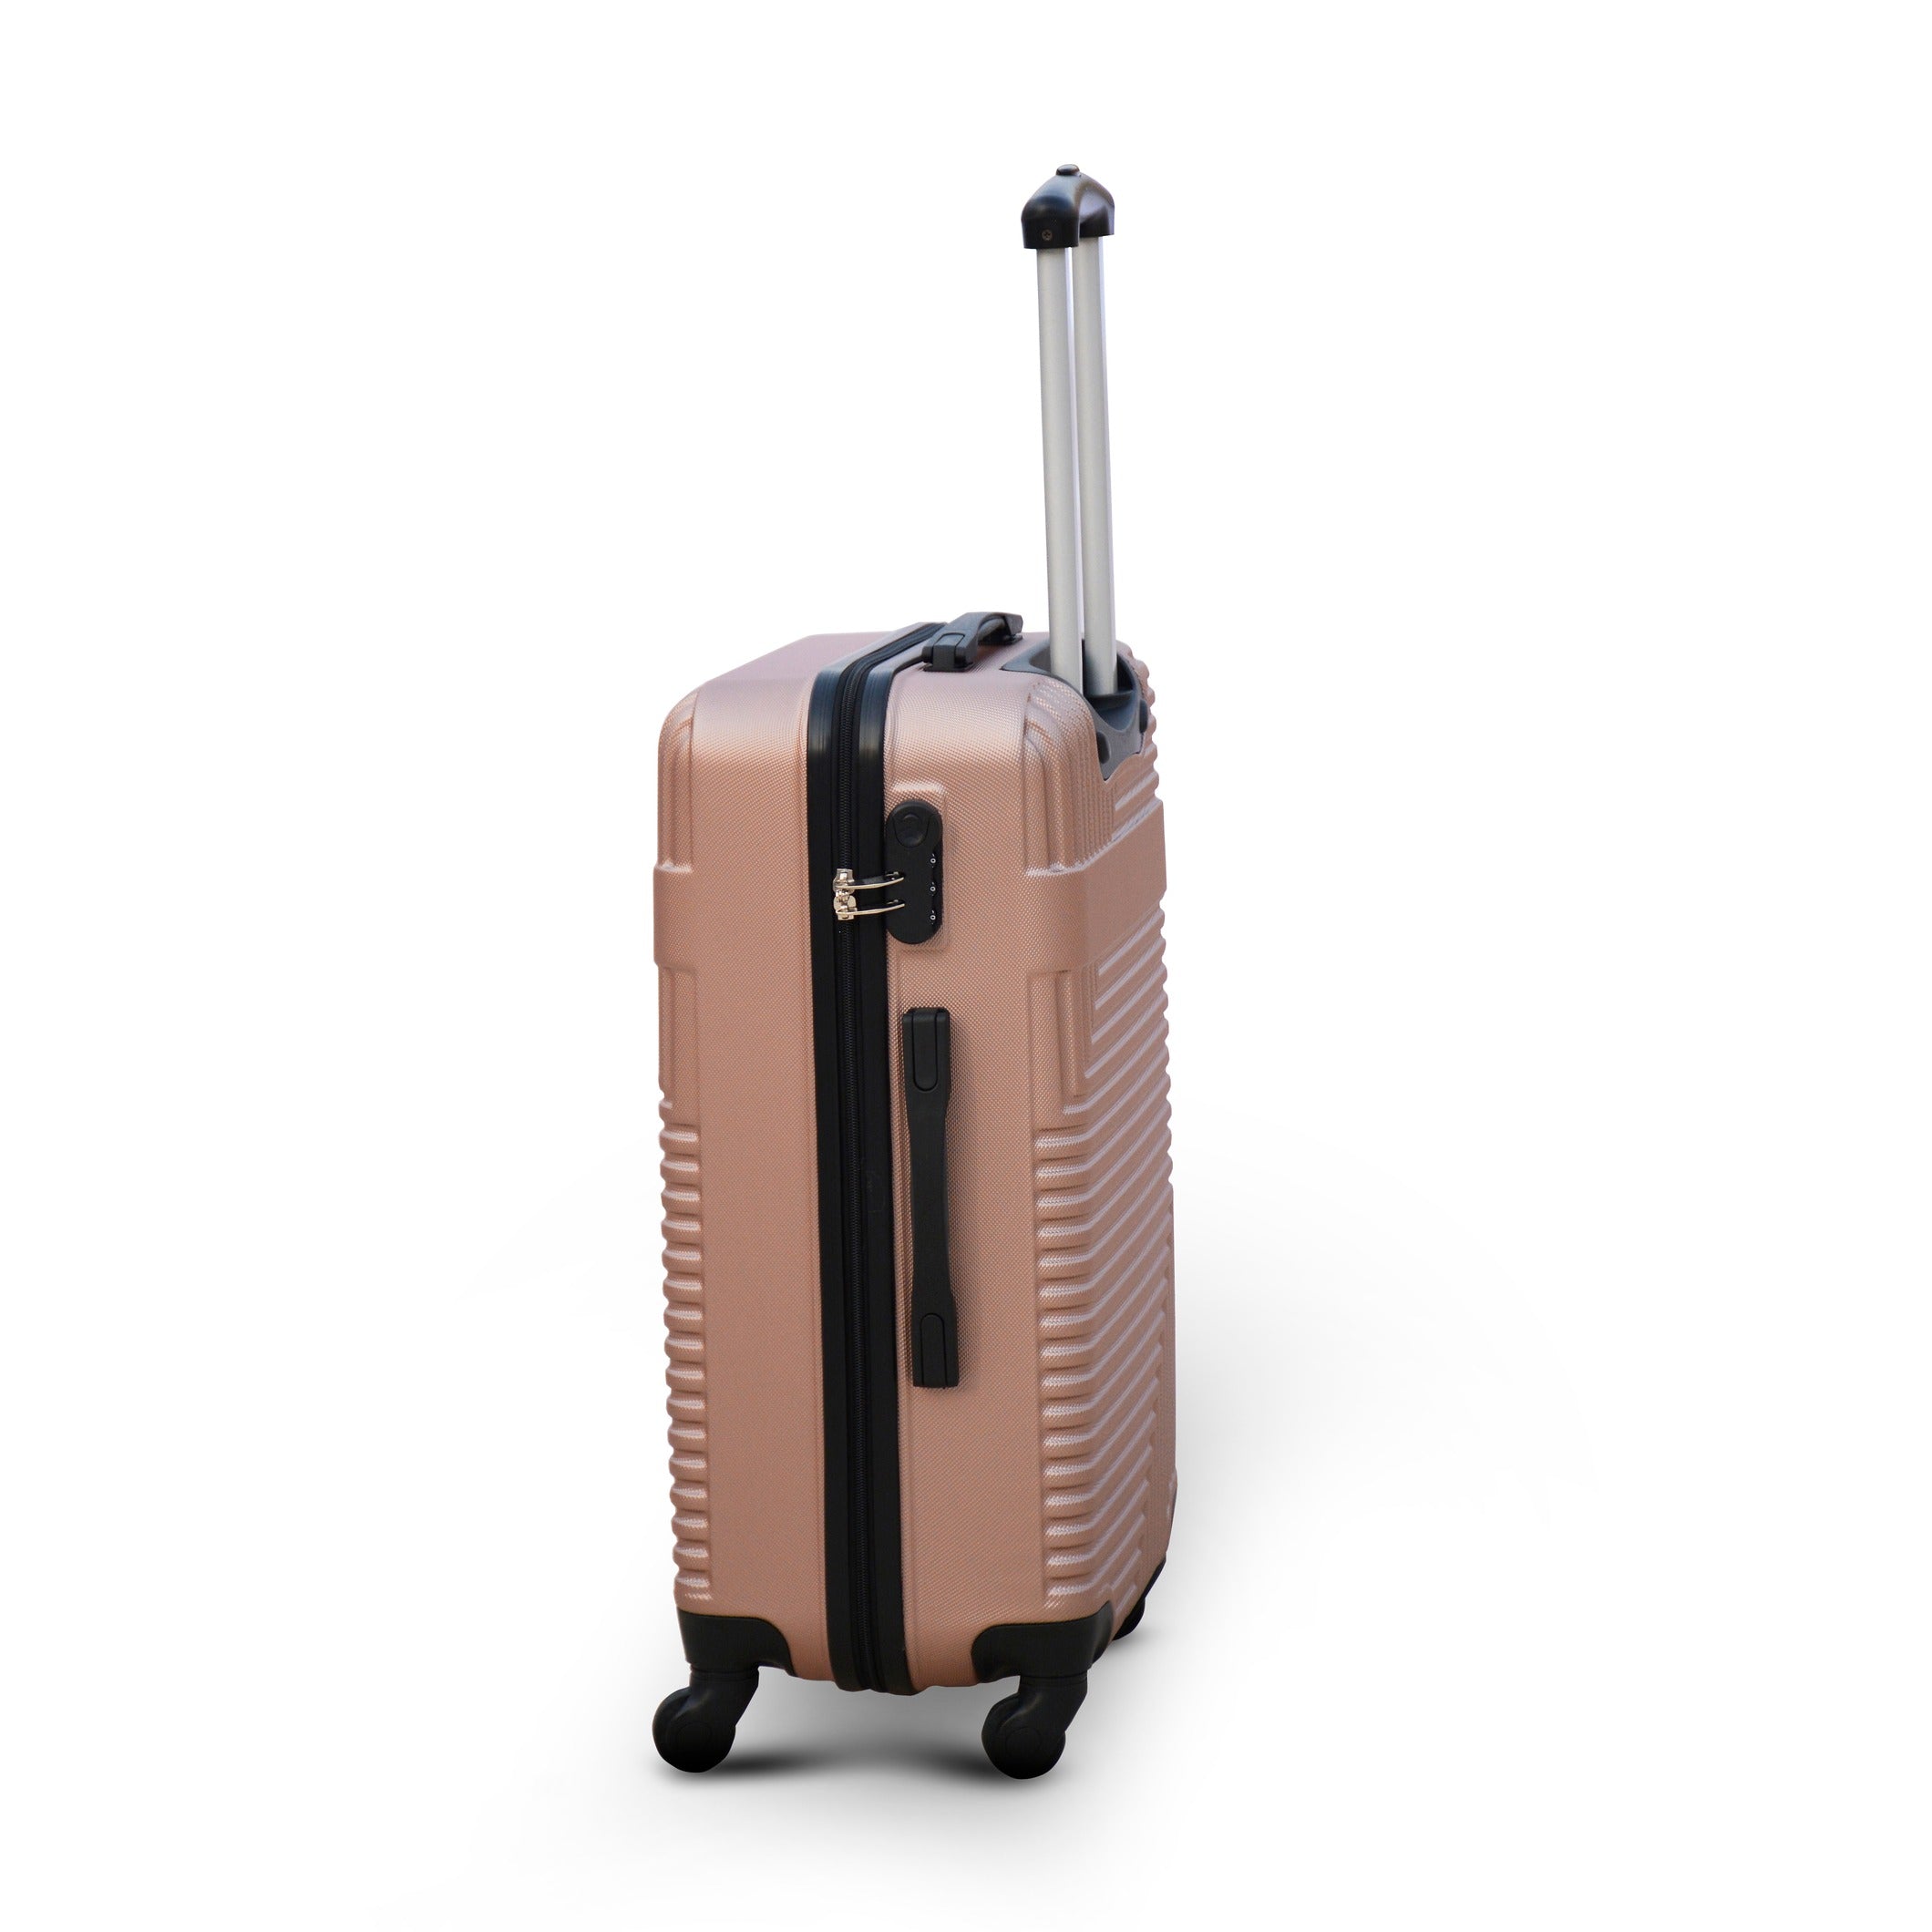 24" Rose Gold Colour Travel Way ABS Luggage Lightweight Hard Case Trolley Bag | 2 Year Warranty